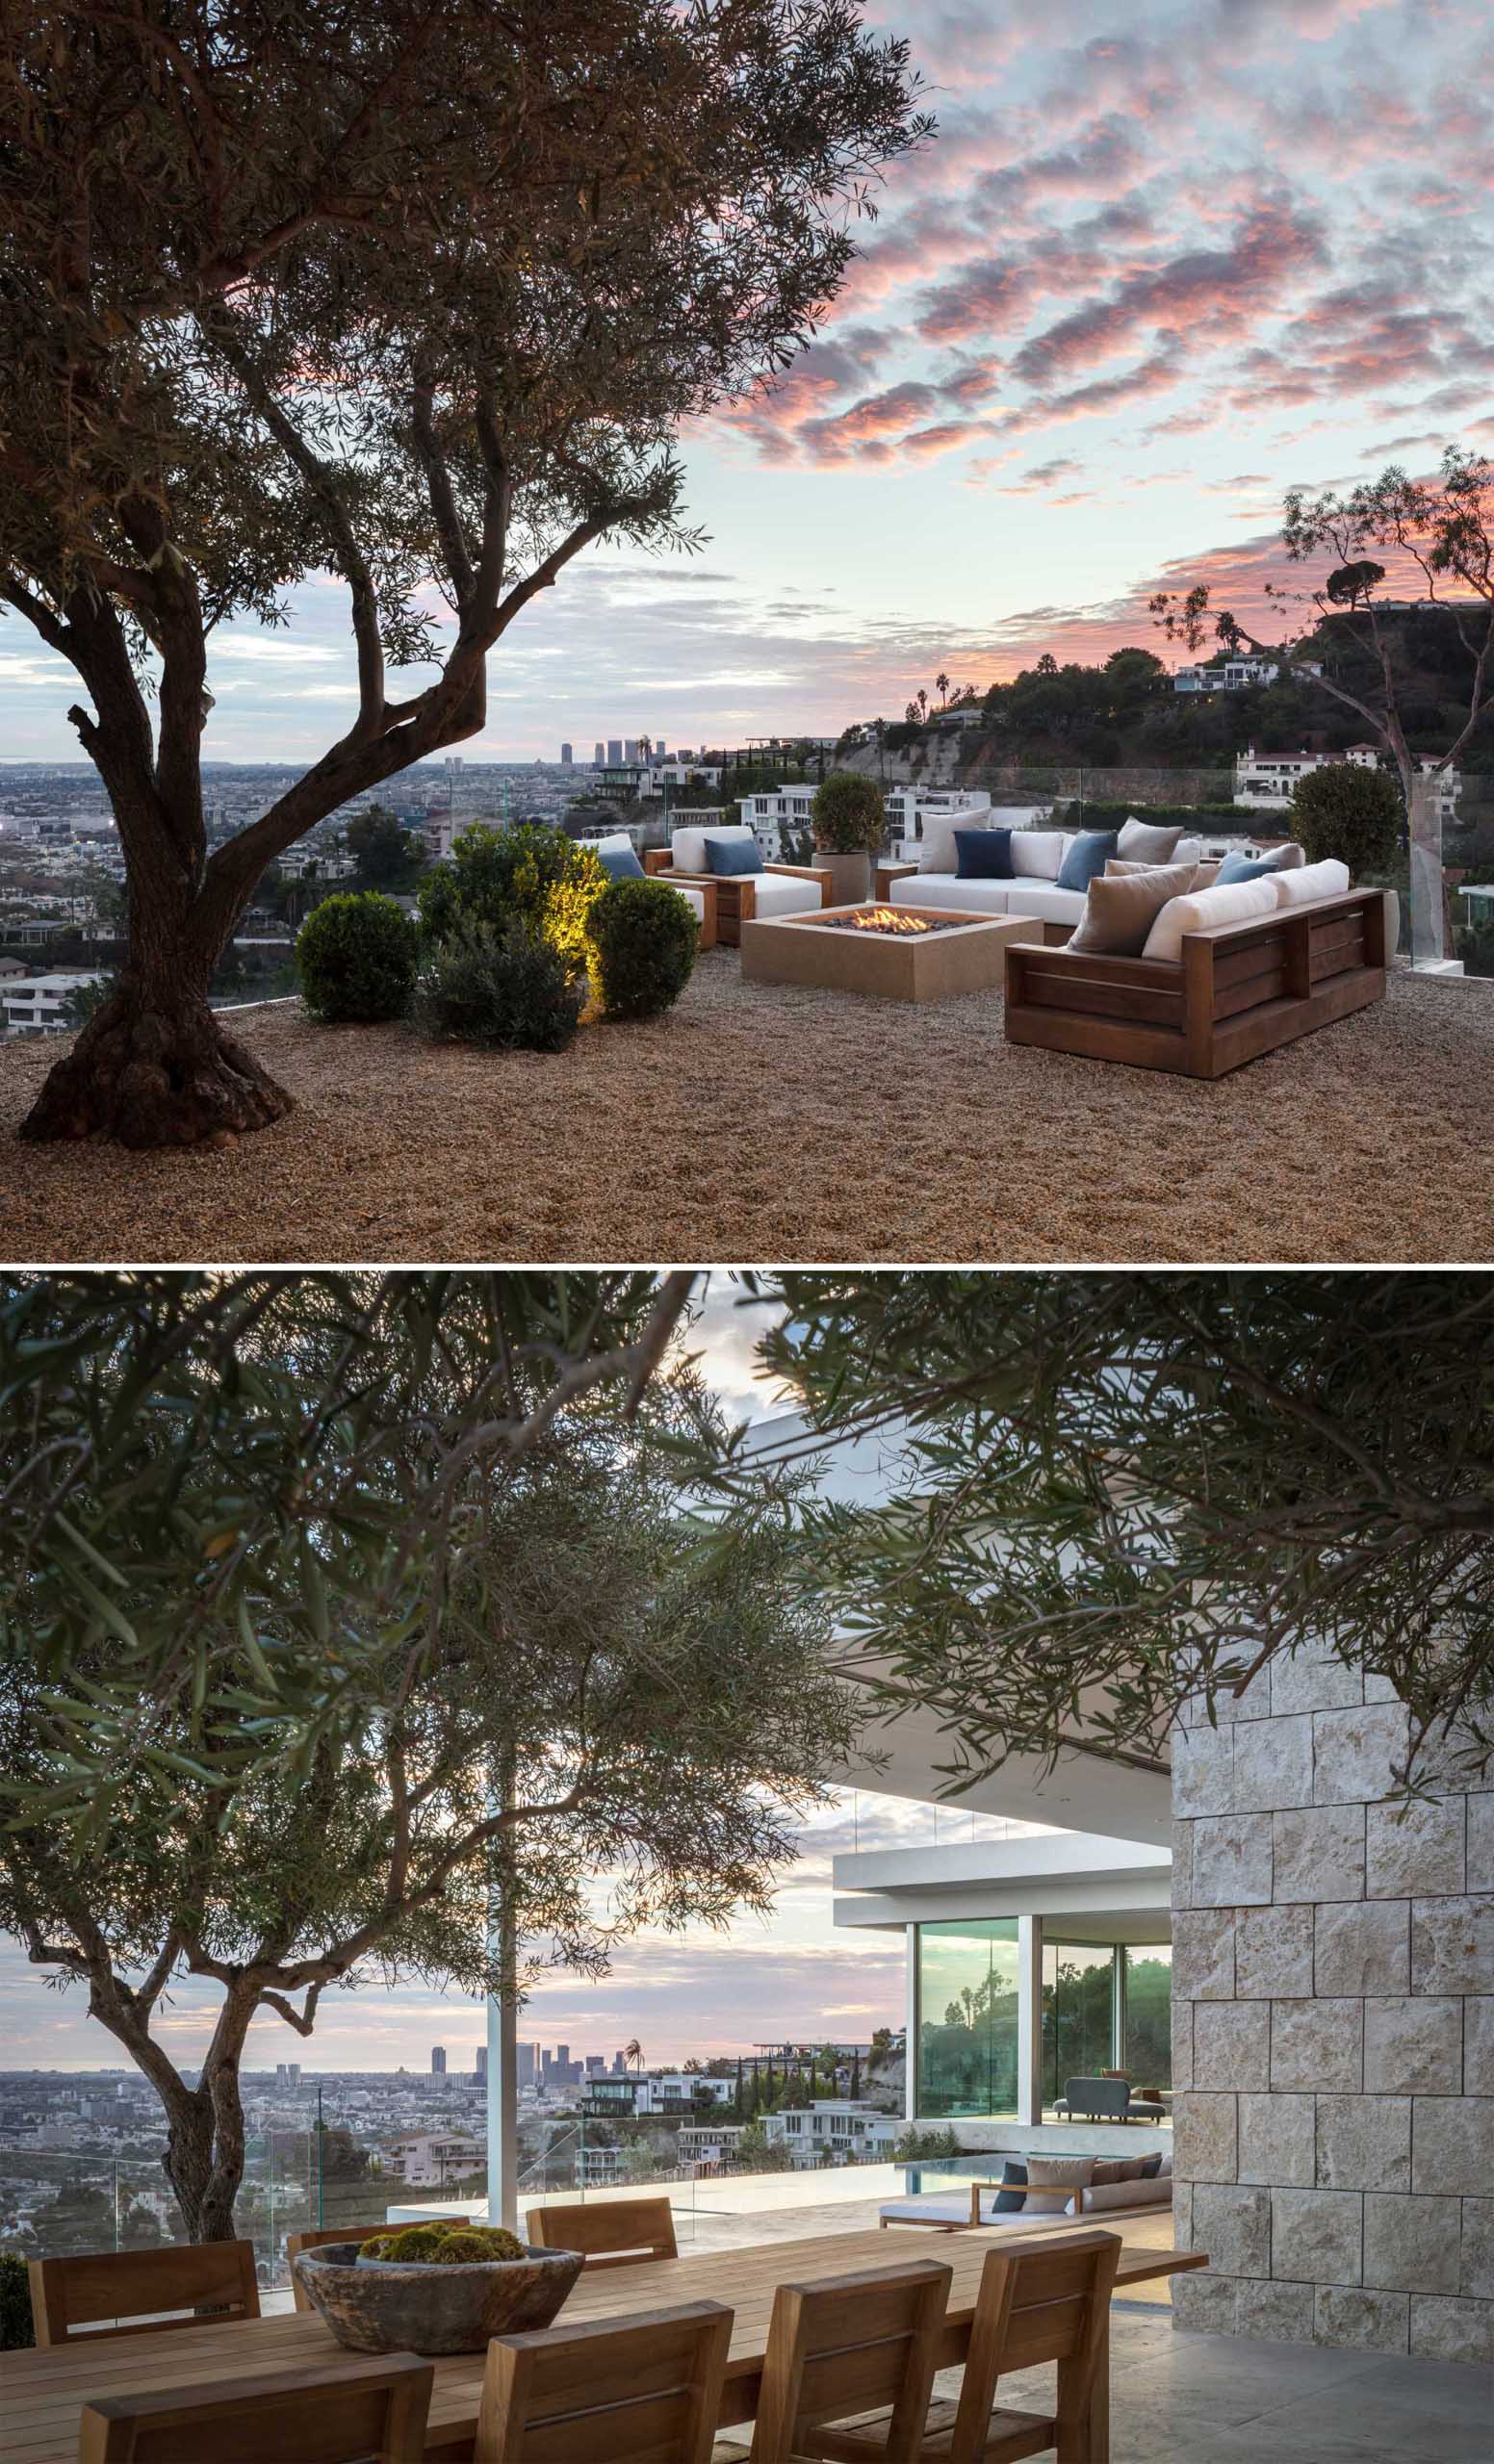 A modern house with an outdoor lounge and fire pit, and an outdoor dining area with olive trees.